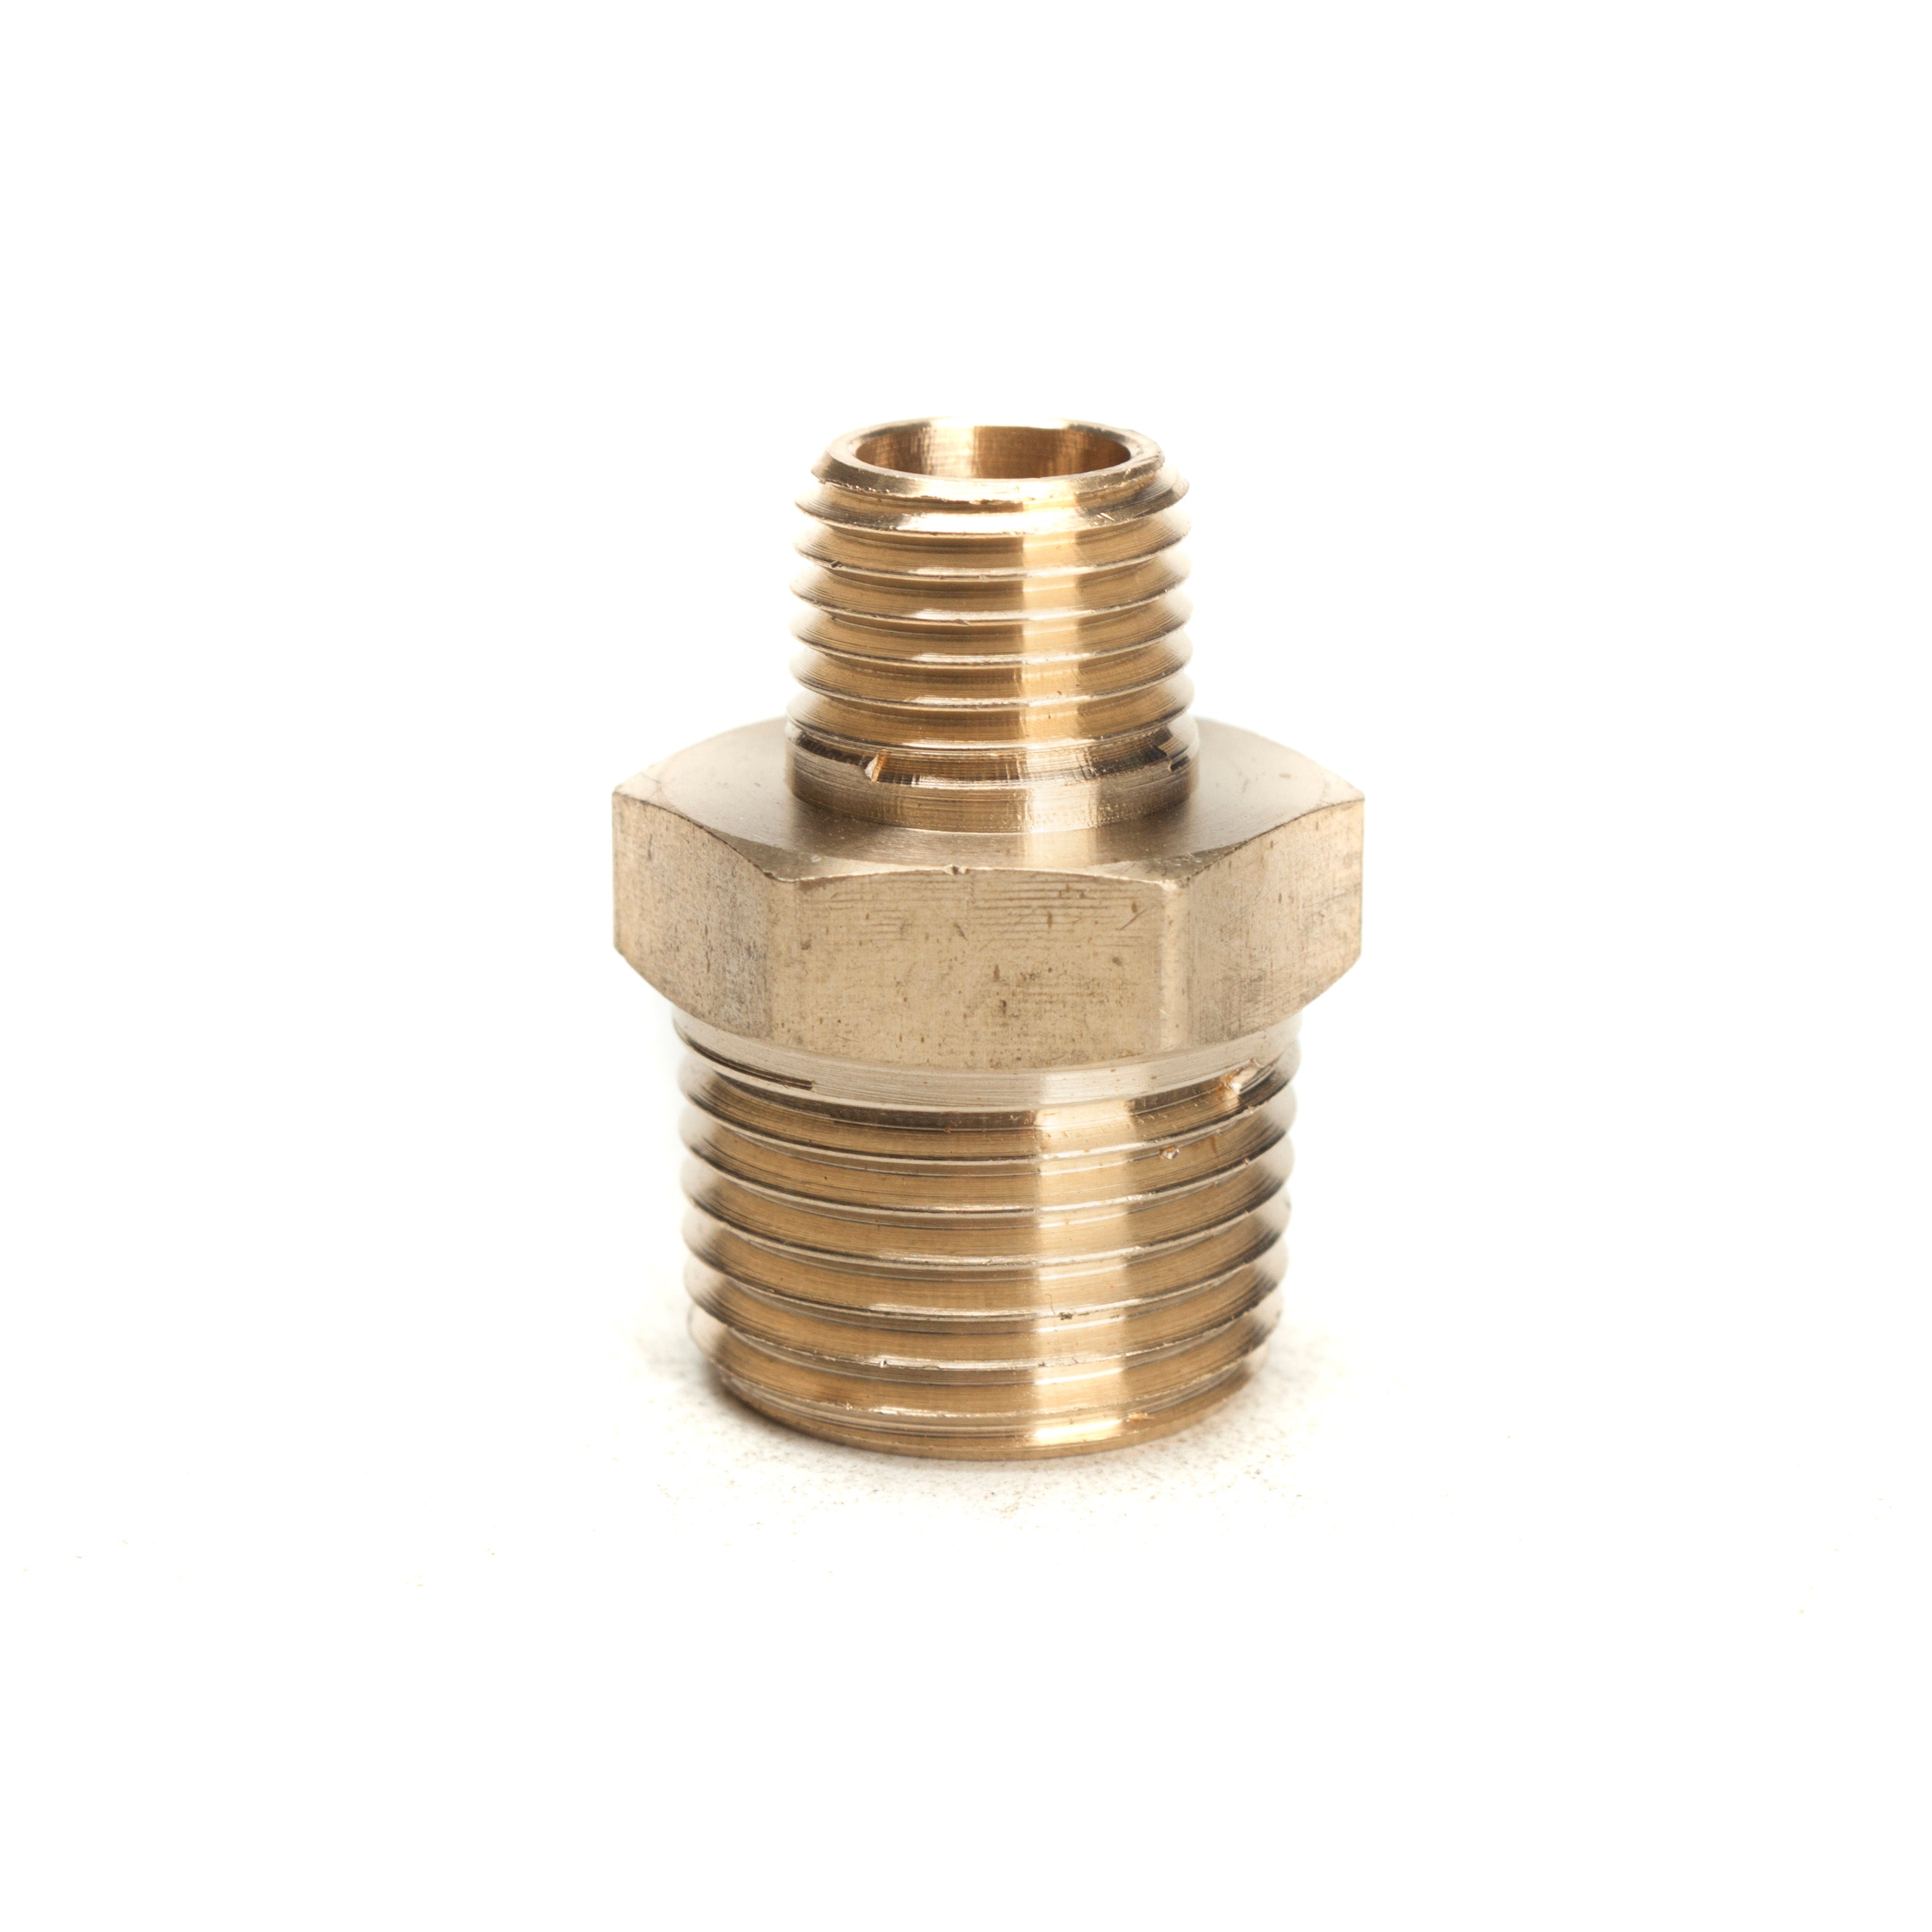 3/4 Female to 1/2 Male Thread Hex Reducing Nipple Connector Brass